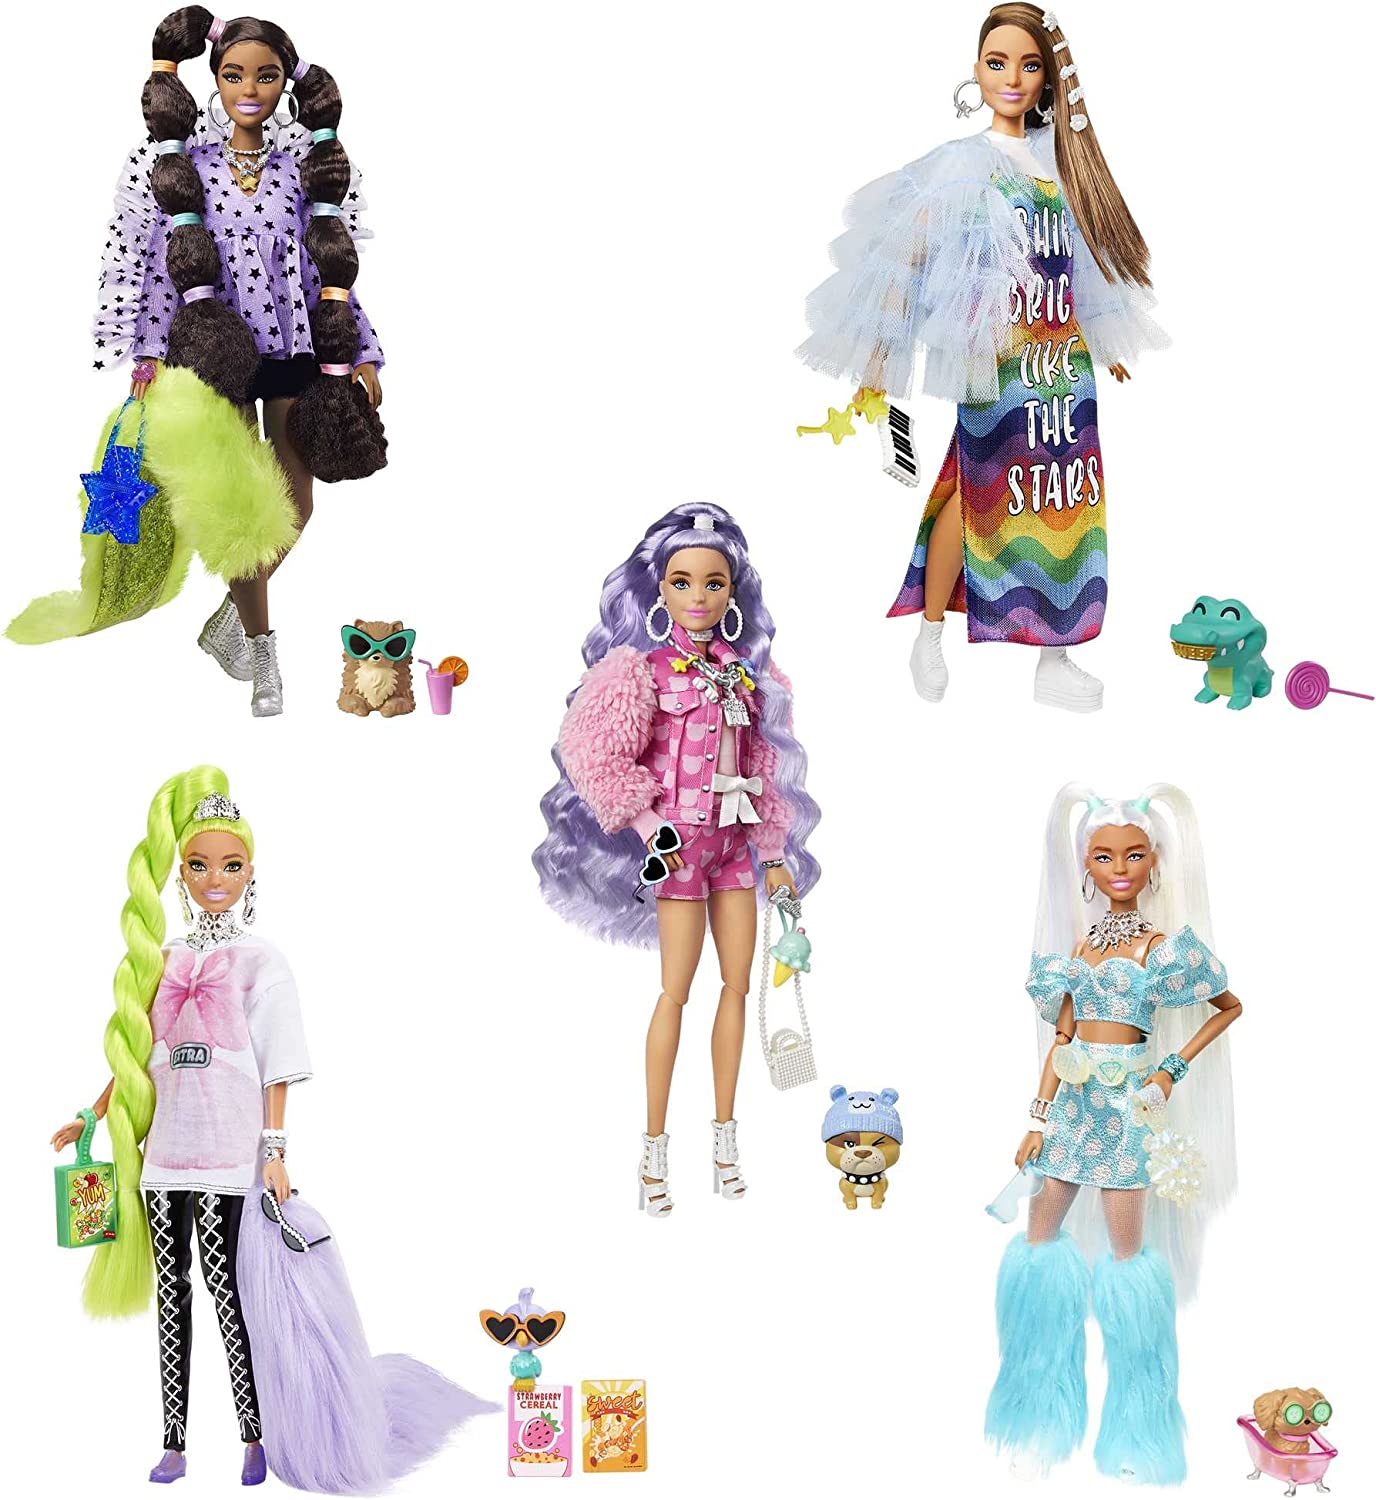 Just found out the Barbie Extra 5-pack exclusive (the only one I want) has  polypropylene hair I´ll still try to get her 2nd hand r if the pack gets  to like 50%